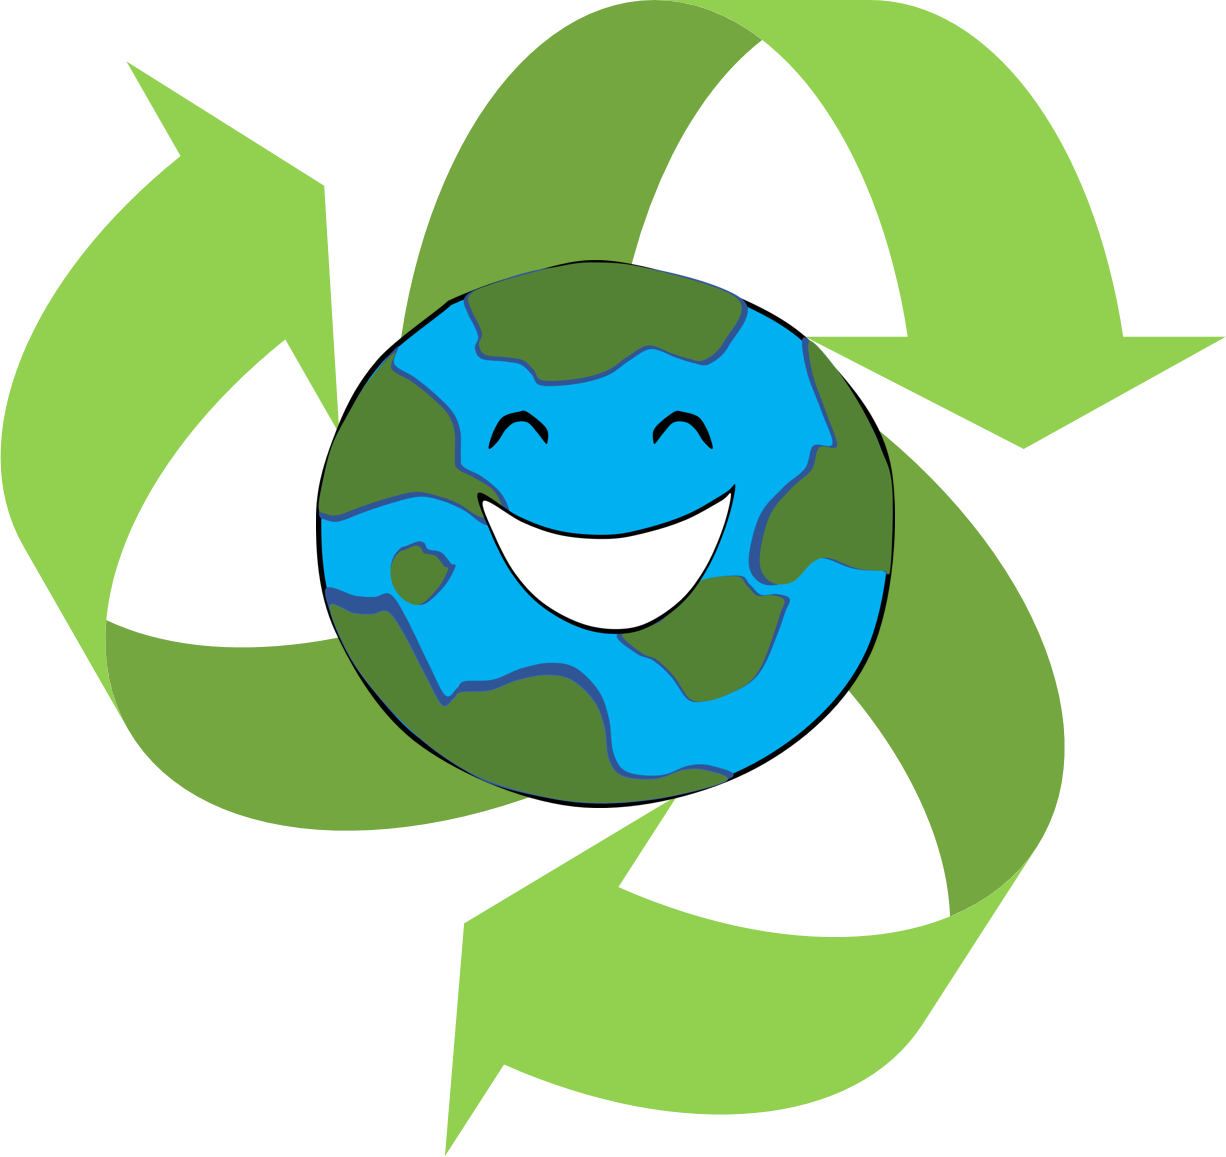 Reduce reuse recycle clipart club